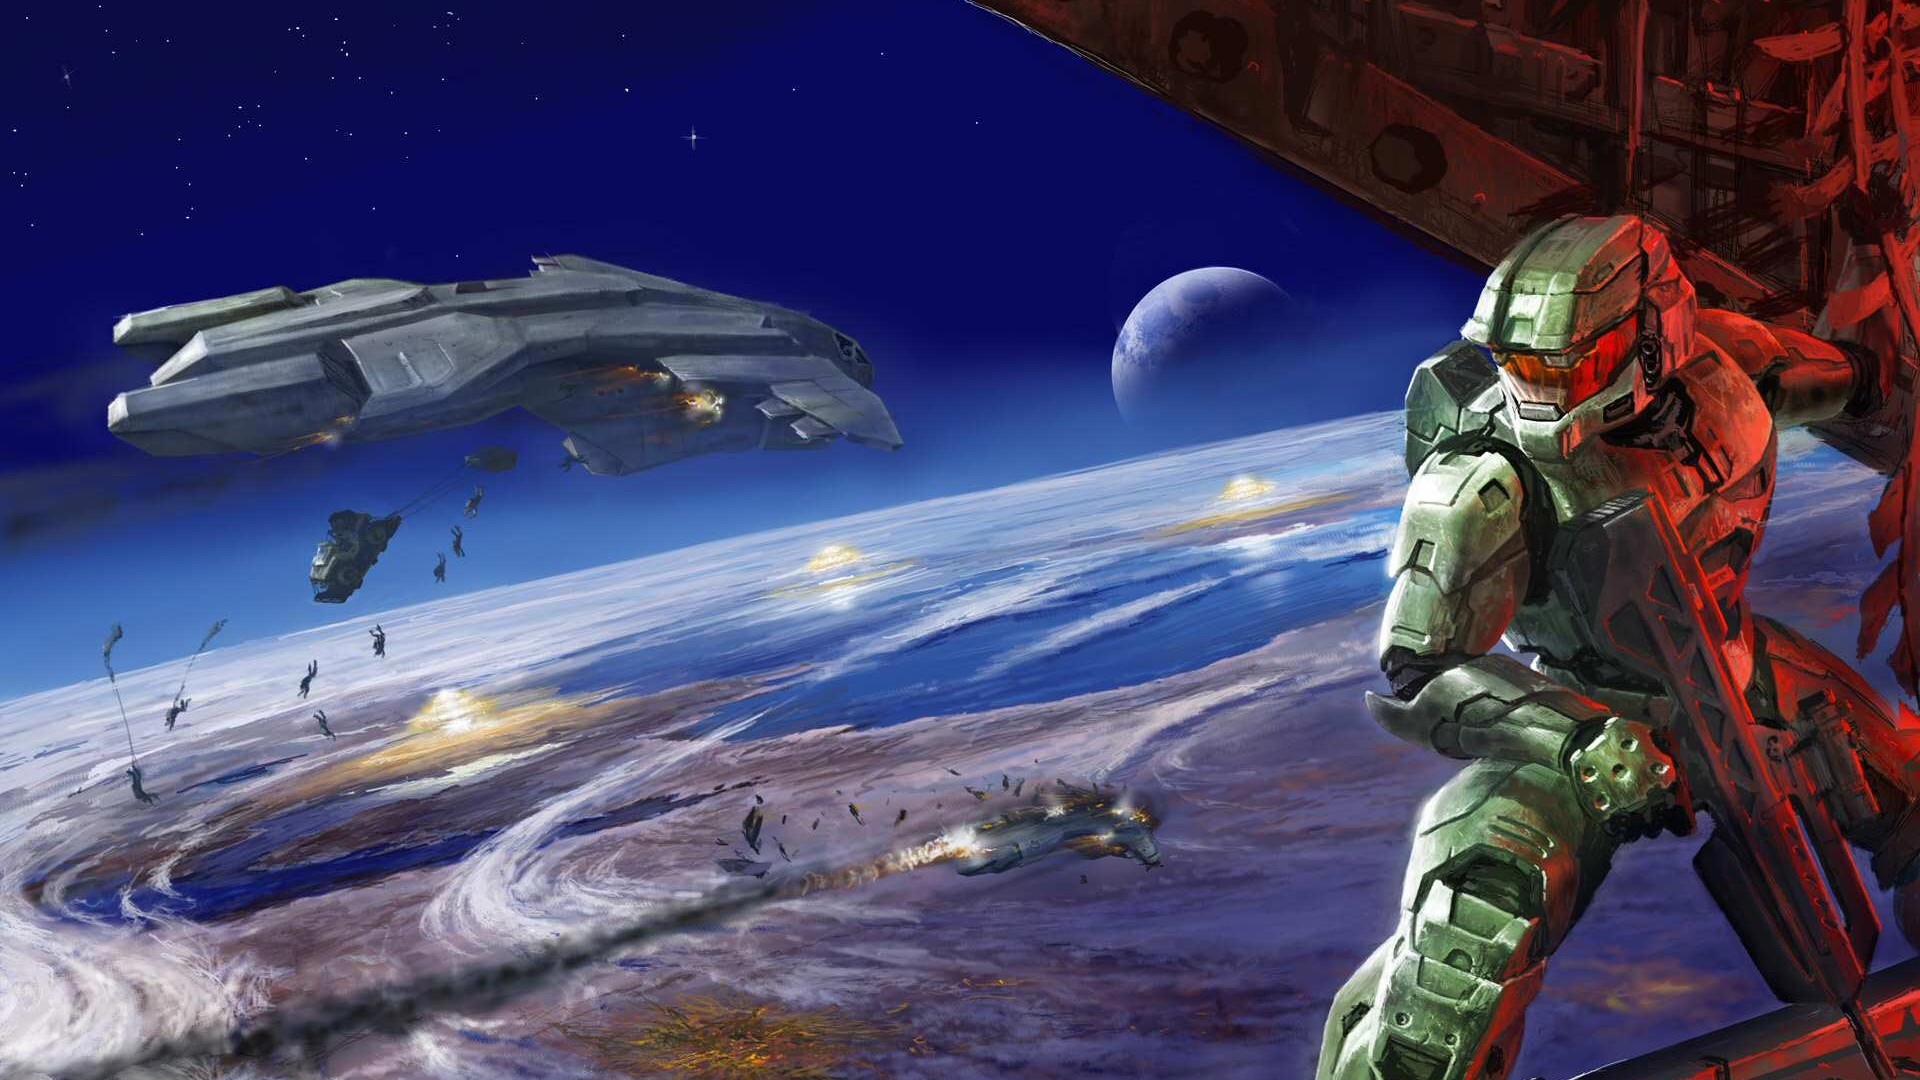 Halo, Halo 2, Halo: Master Chief Collection, Video games, Space, Spaceship, Planet Wallpaper